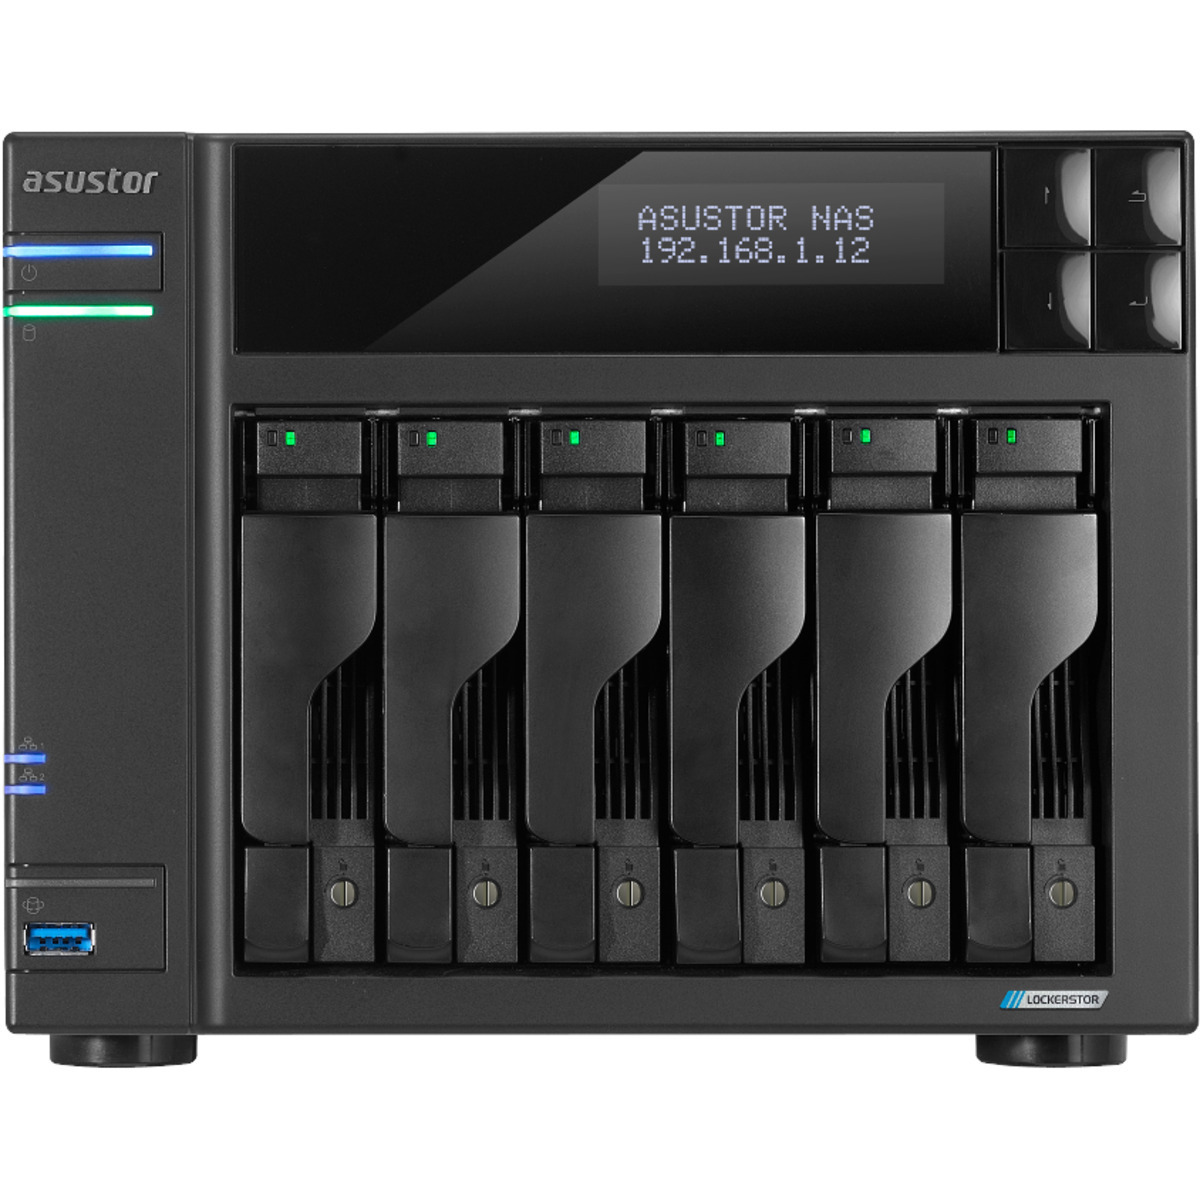 ASUSTOR LOCKERSTOR 6 Gen2 AS6706T 50tb 6-Bay Desktop Multimedia / Power User / Business NAS - Network Attached Storage Device 5x10tb Seagate IronWolf ST10000VN000 3.5 7200rpm SATA 6Gb/s HDD NAS Class Drives Installed - Burn-In Tested - FREE RAM UPGRADE LOCKERSTOR 6 Gen2 AS6706T